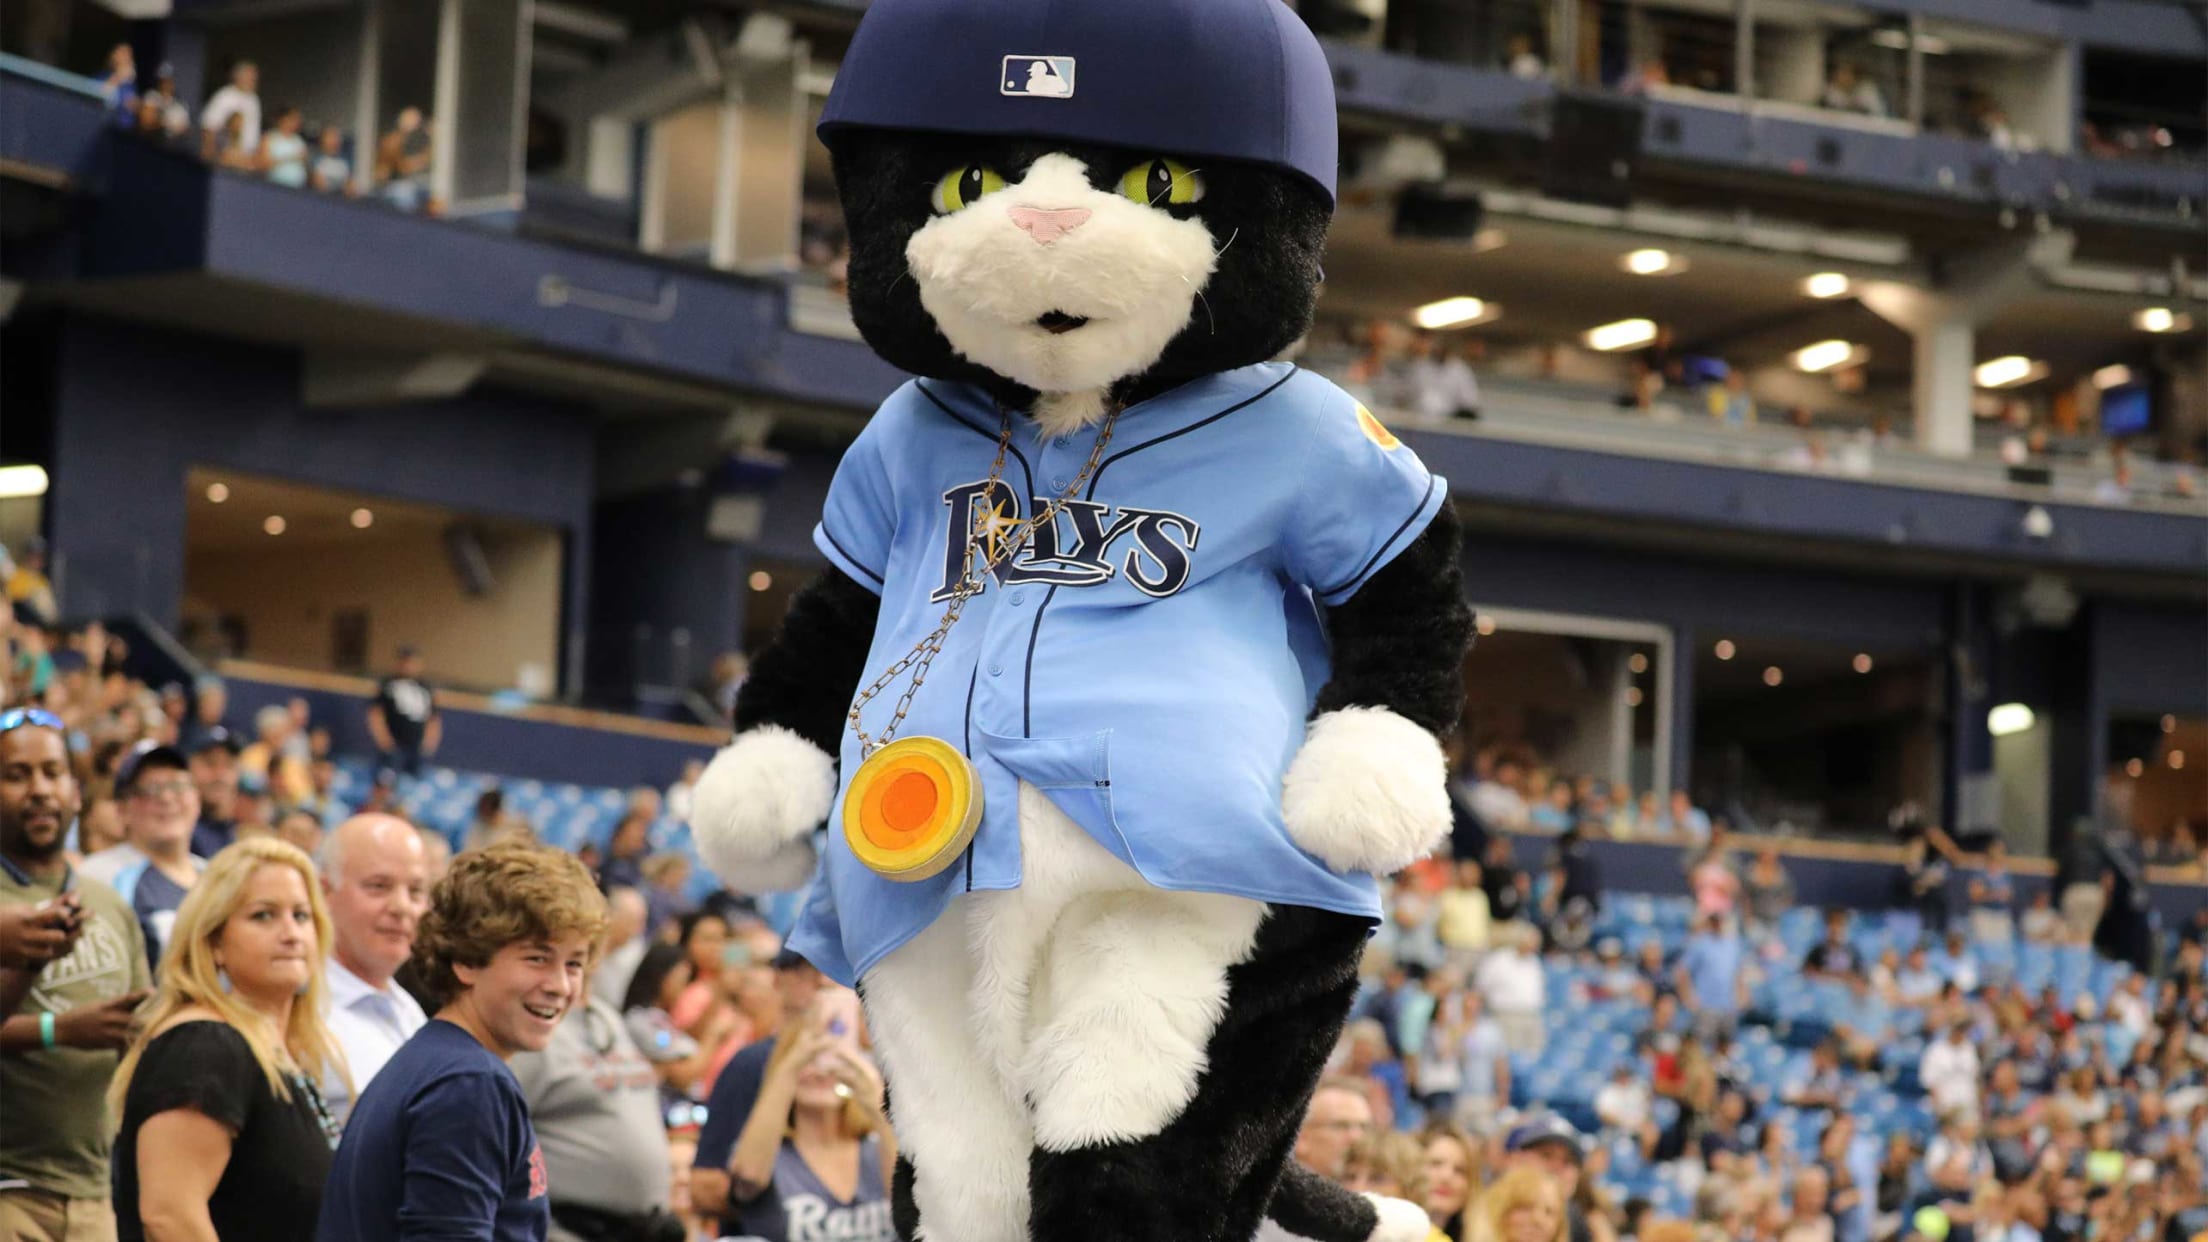 Me and the mascot for Tampa bay rays : r/mlb